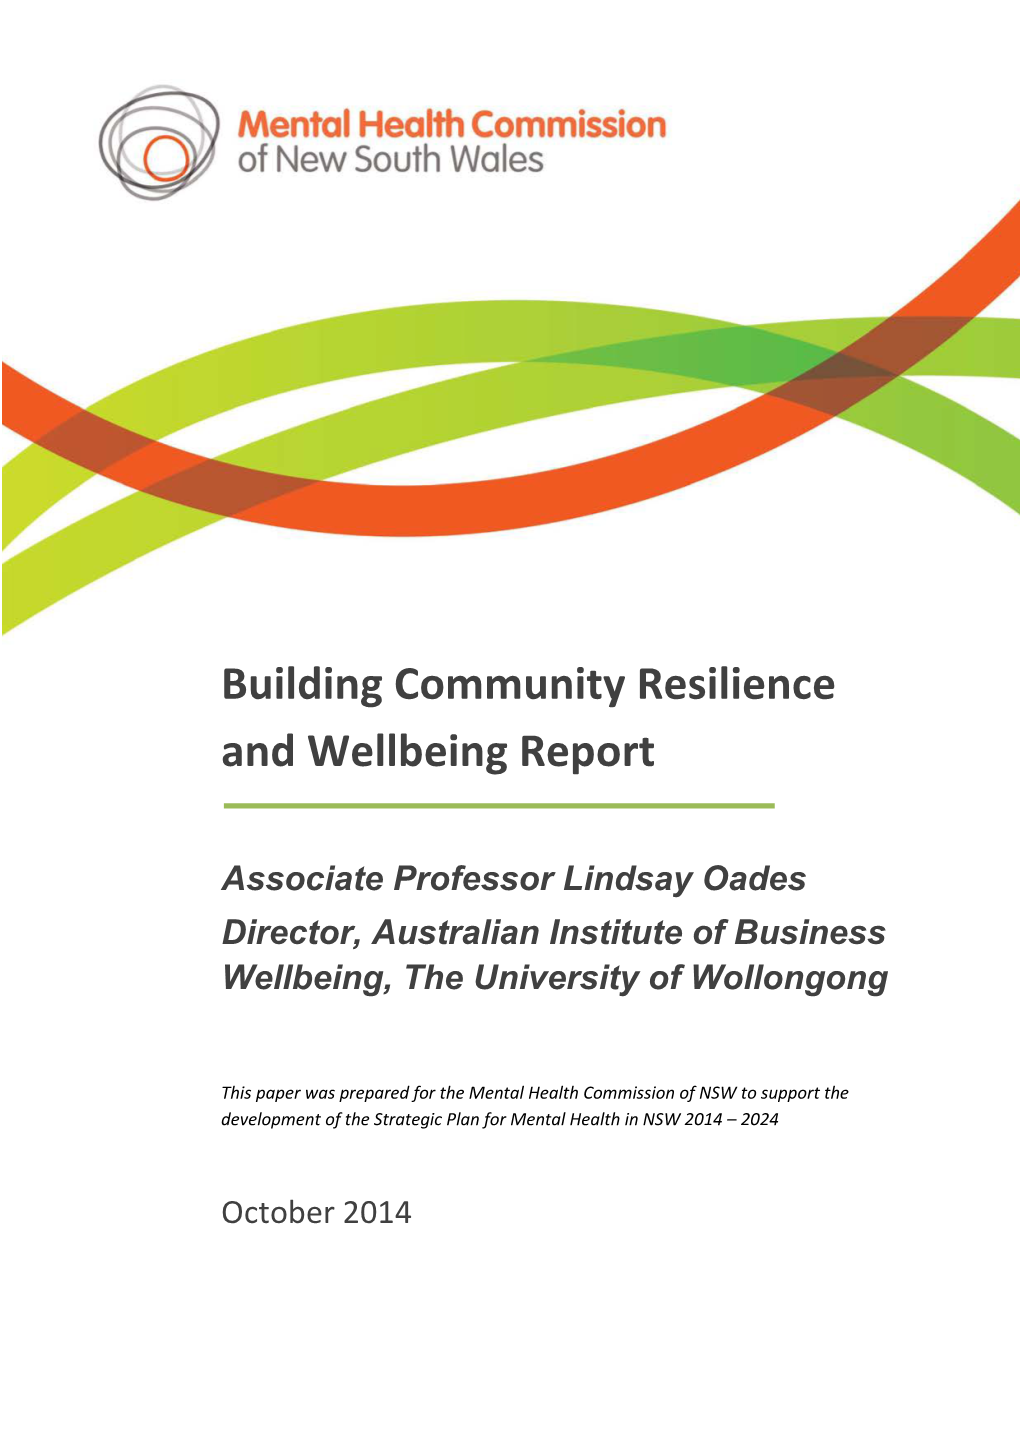 Building Community Resilience and Wellbeing Report